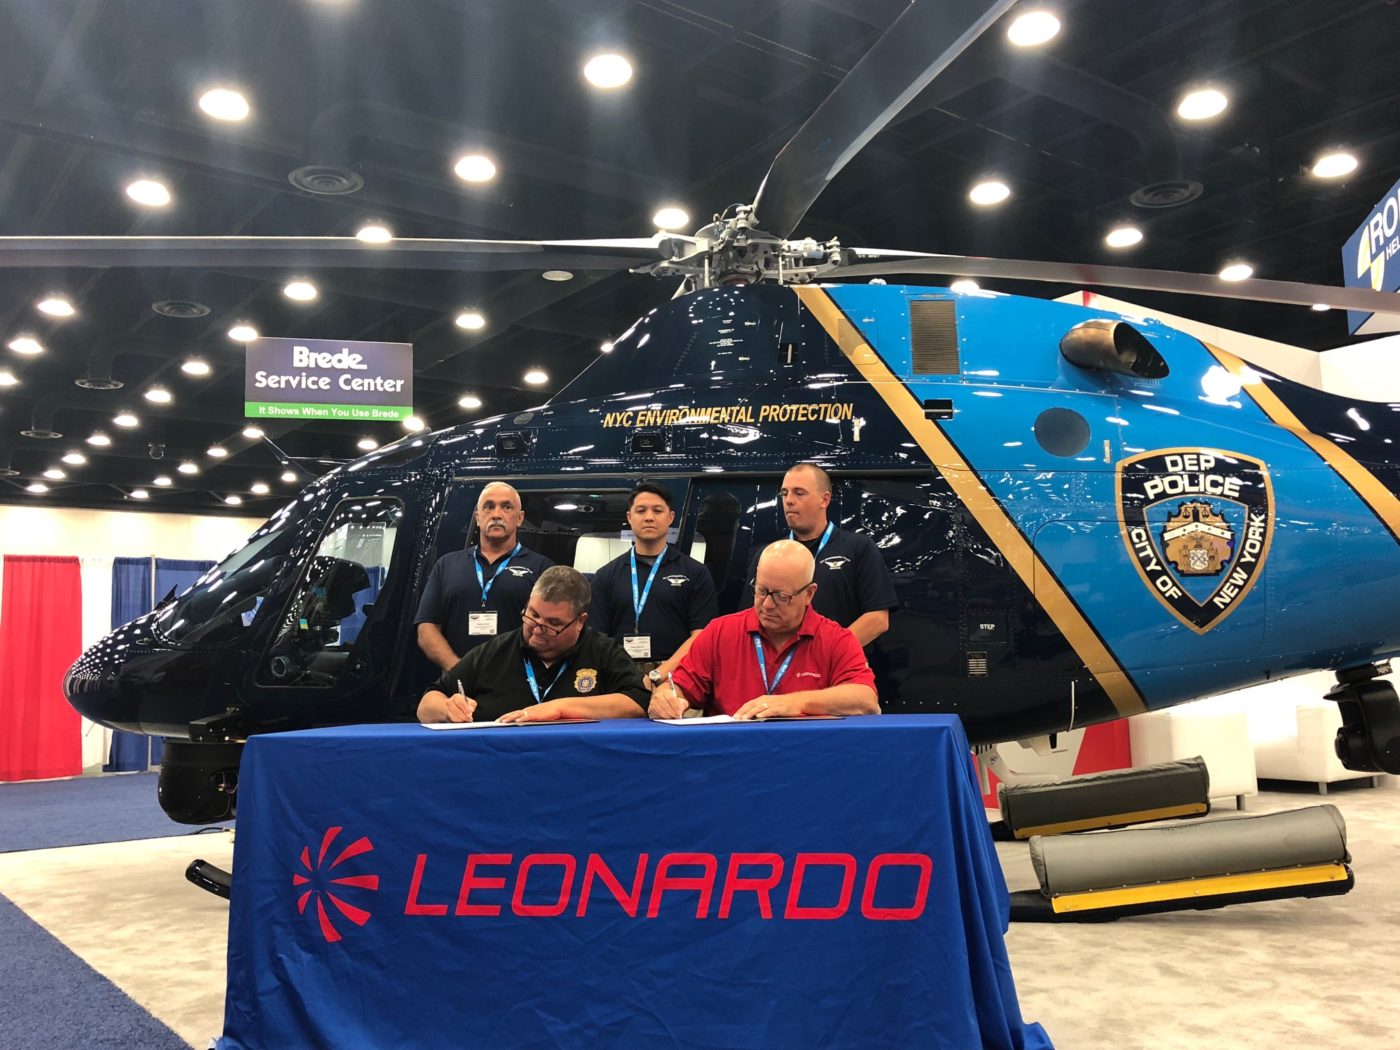 The AW119Kx, outfitted in law enforcement configuration, will support protection of New York City’s drinking water resources. Leonardo Photo